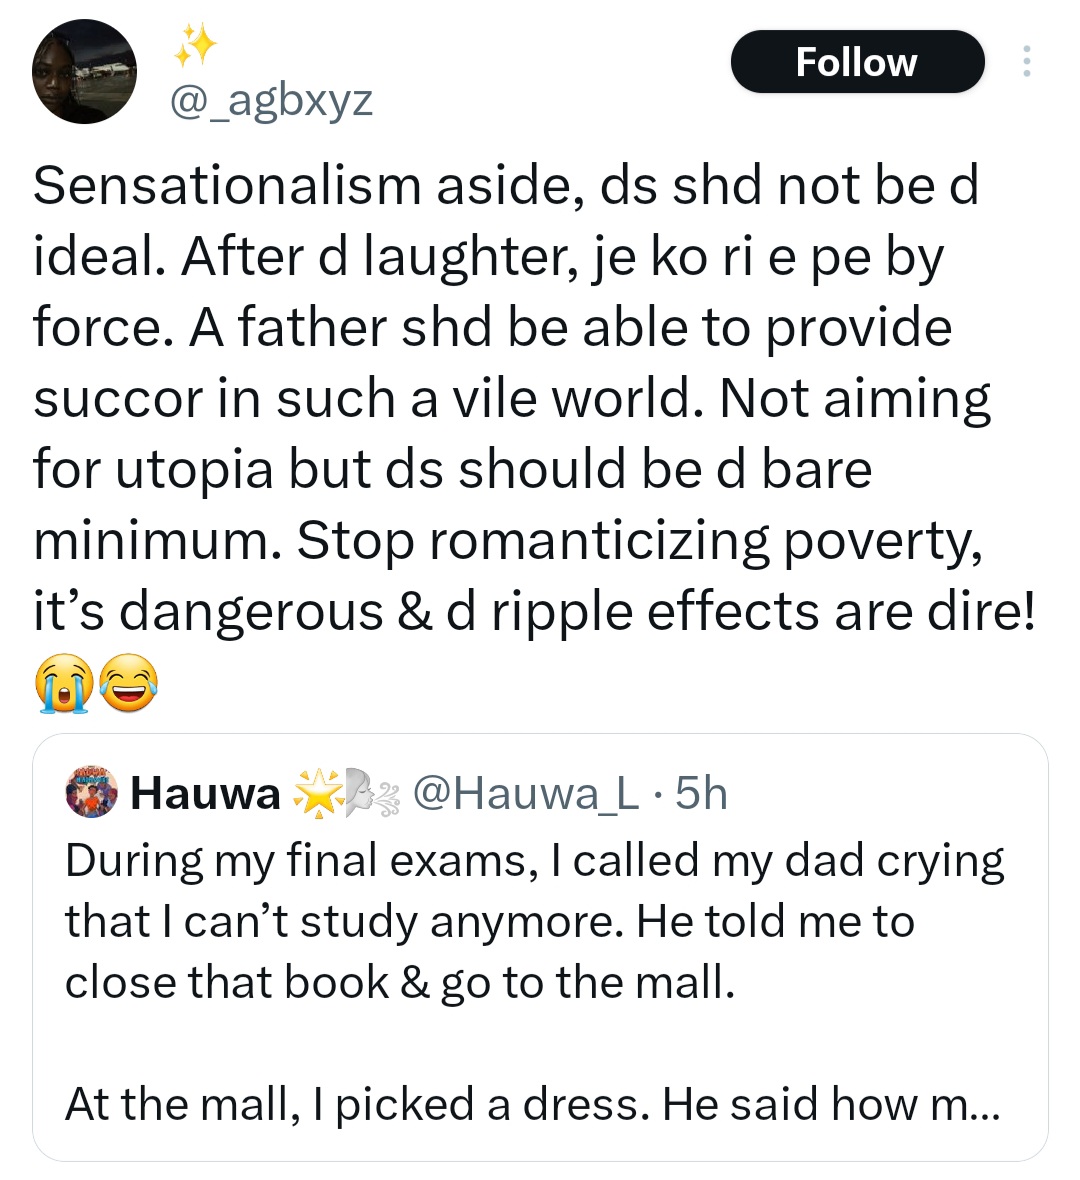 X user shares how her father motivated her to study